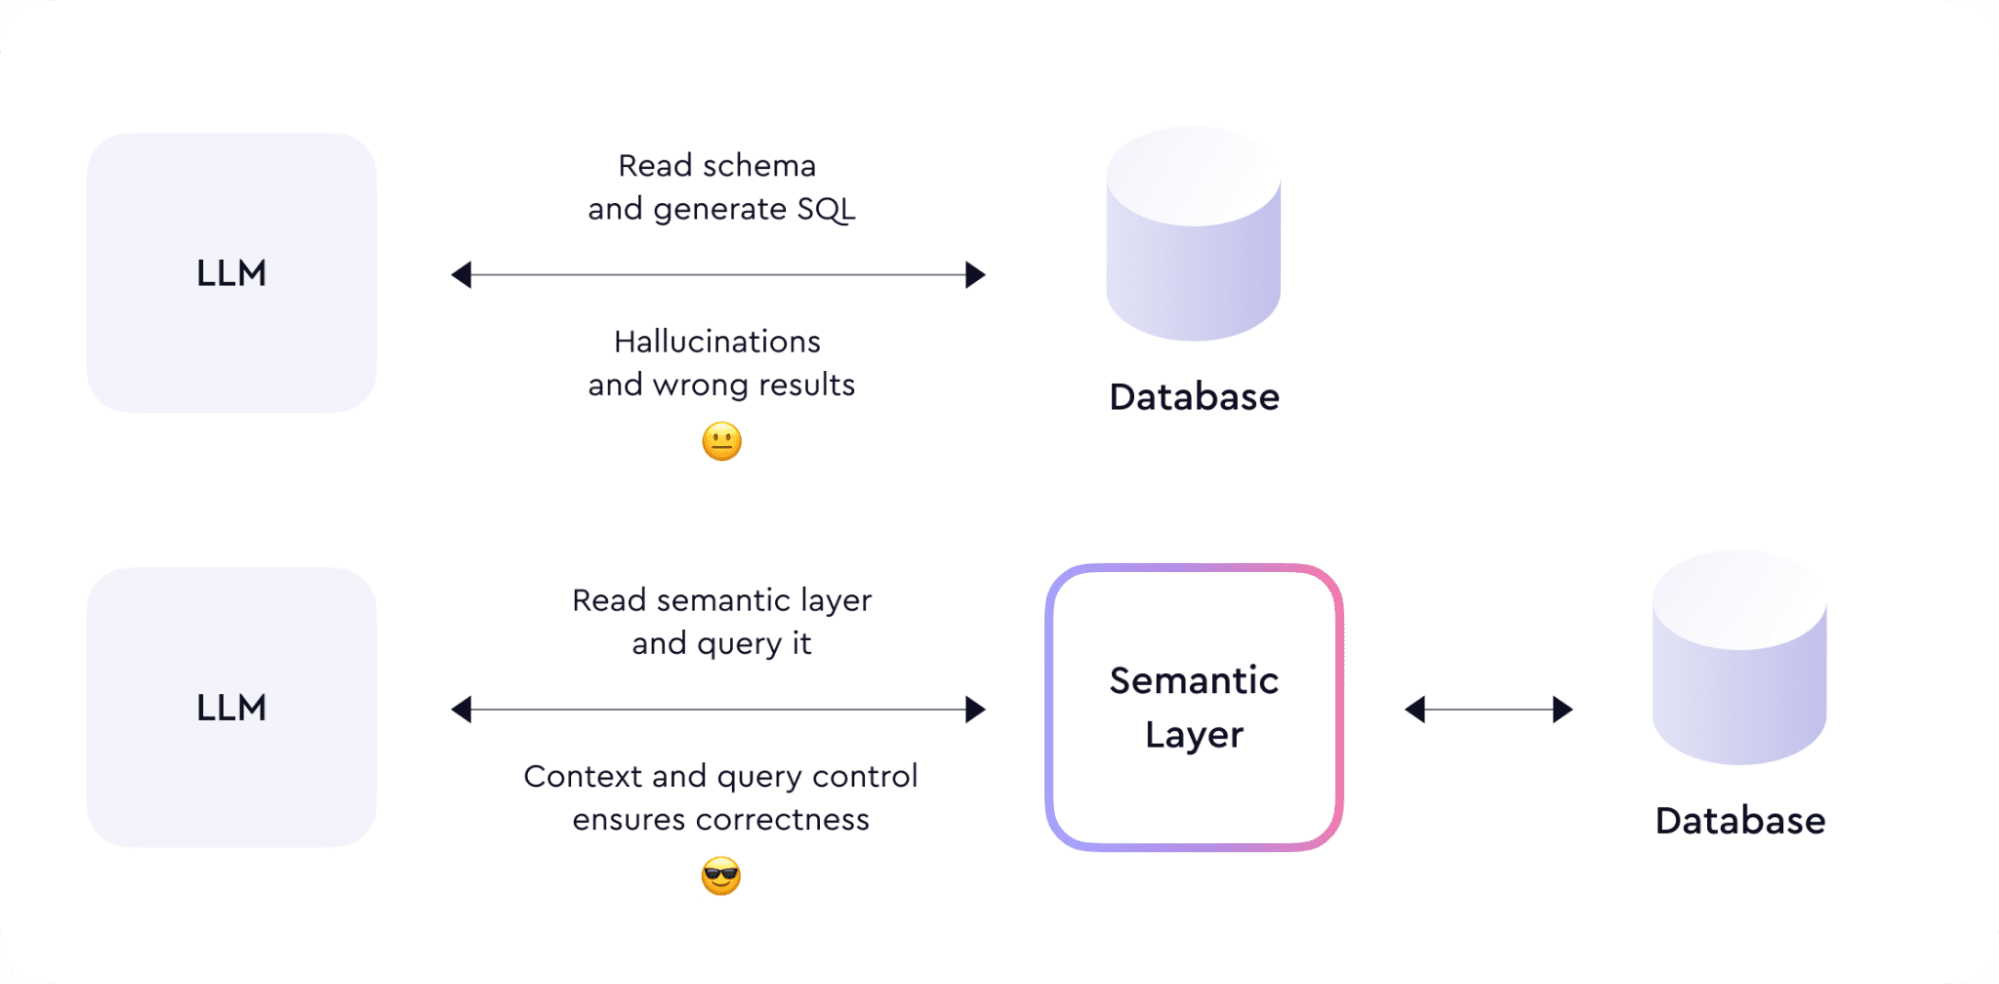 Semantic Layers are the Missing Piece for AI-Enabled Analytics - KDnuggets